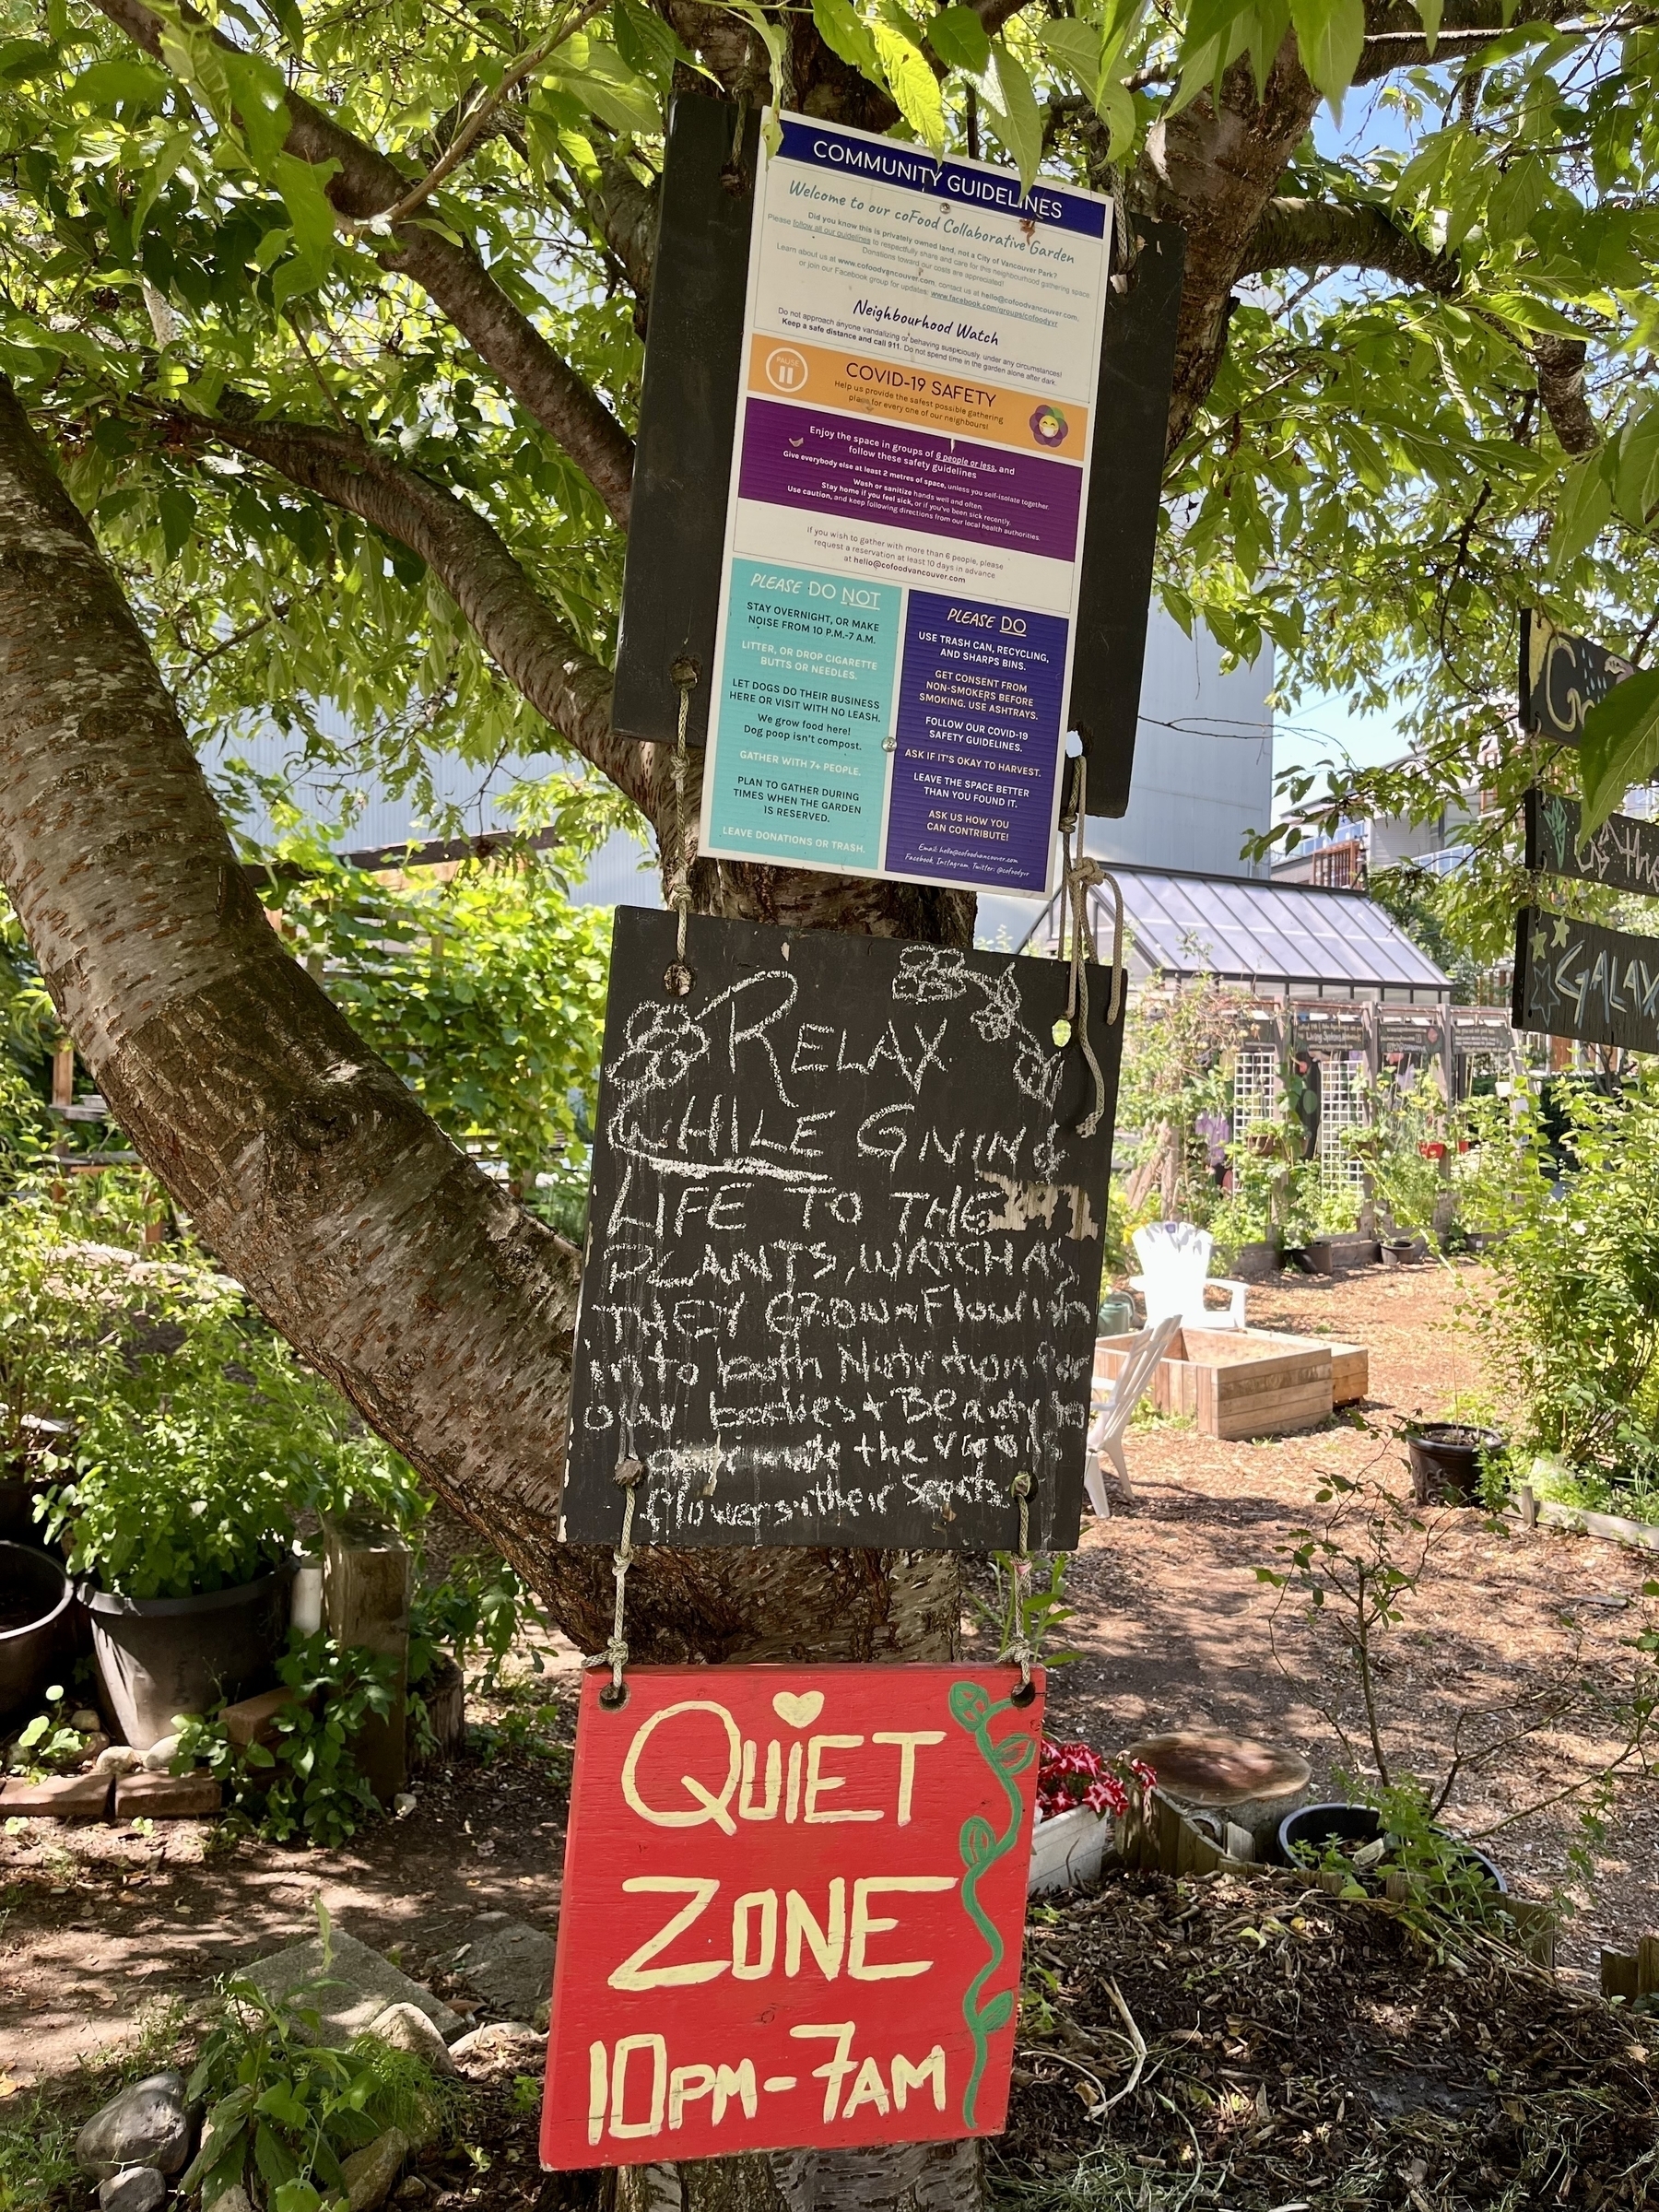 Community Guidelines poster that I’ll get the text for later, a chalk board with a message that begins “relax while giving life to the plants, watch as they grow and flourish…”&10;&10;And a sign that says Quiet Zone, 10pm - 7am